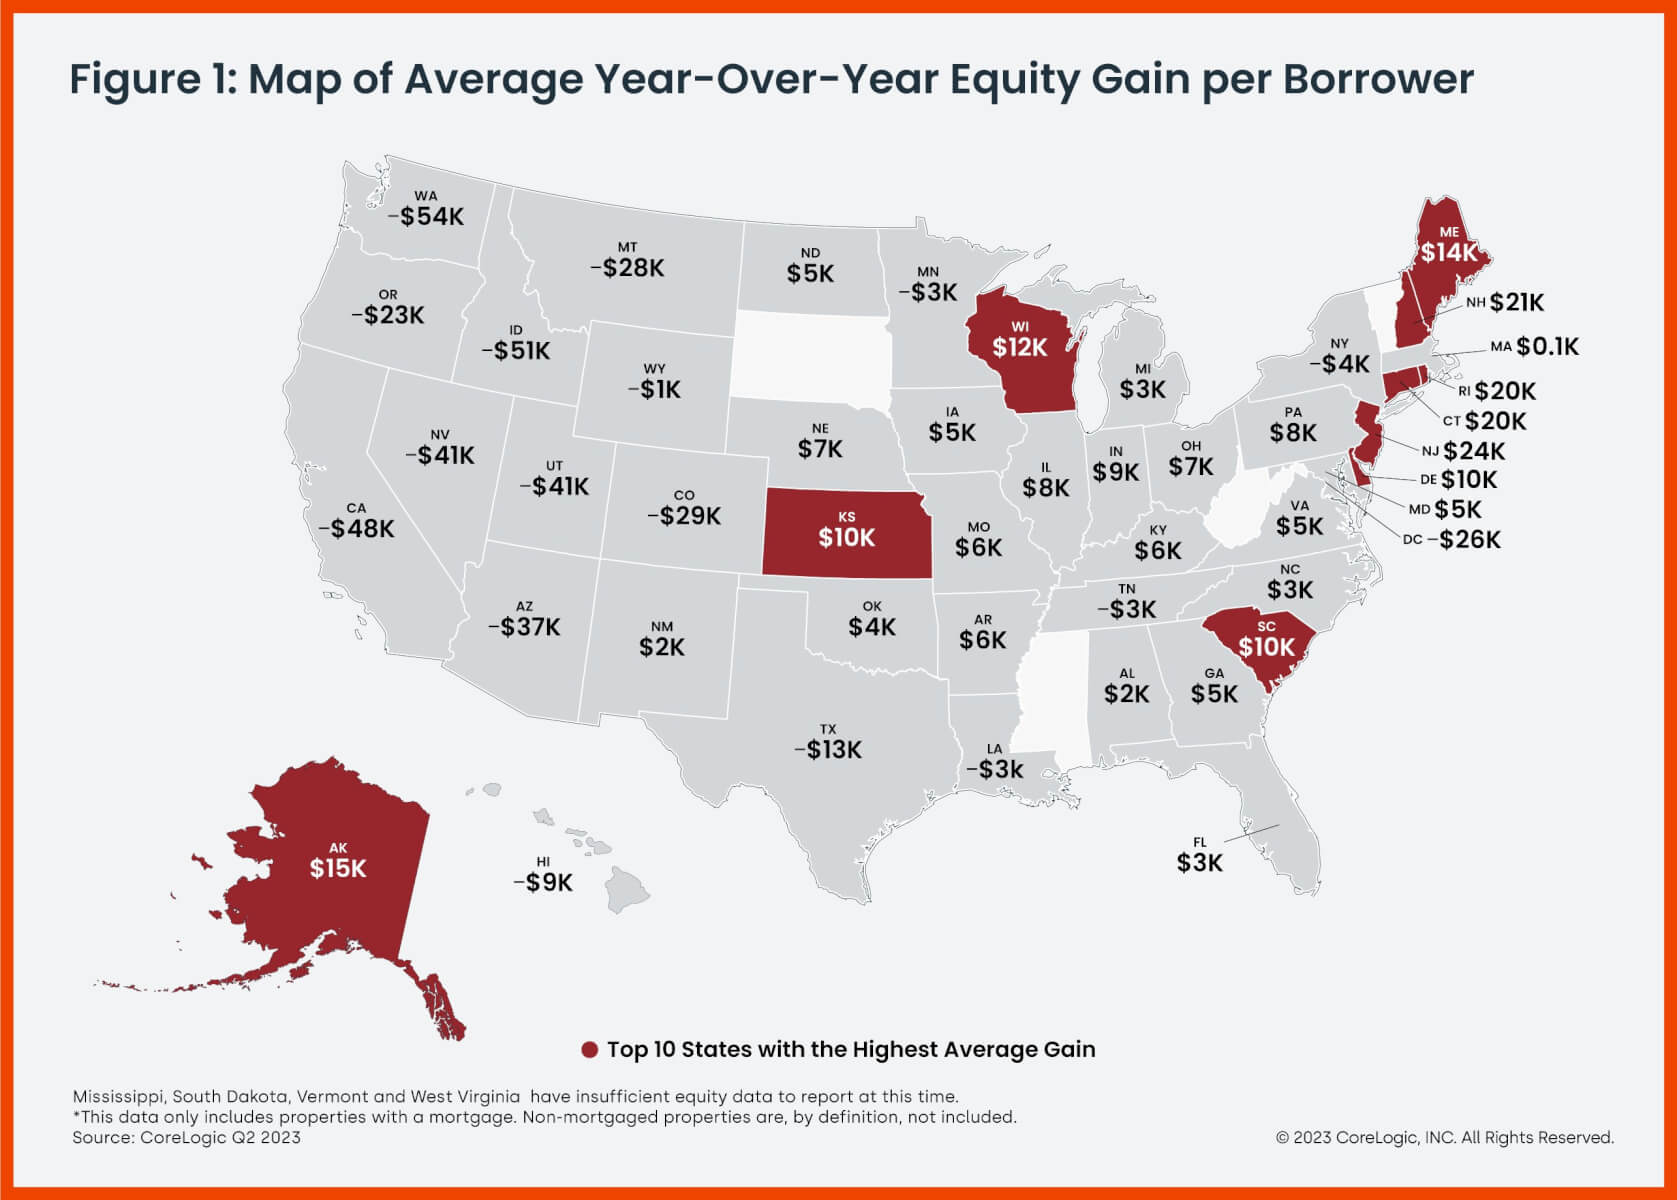 Year-over-year home equity gain by U.S. state, Q2 2023